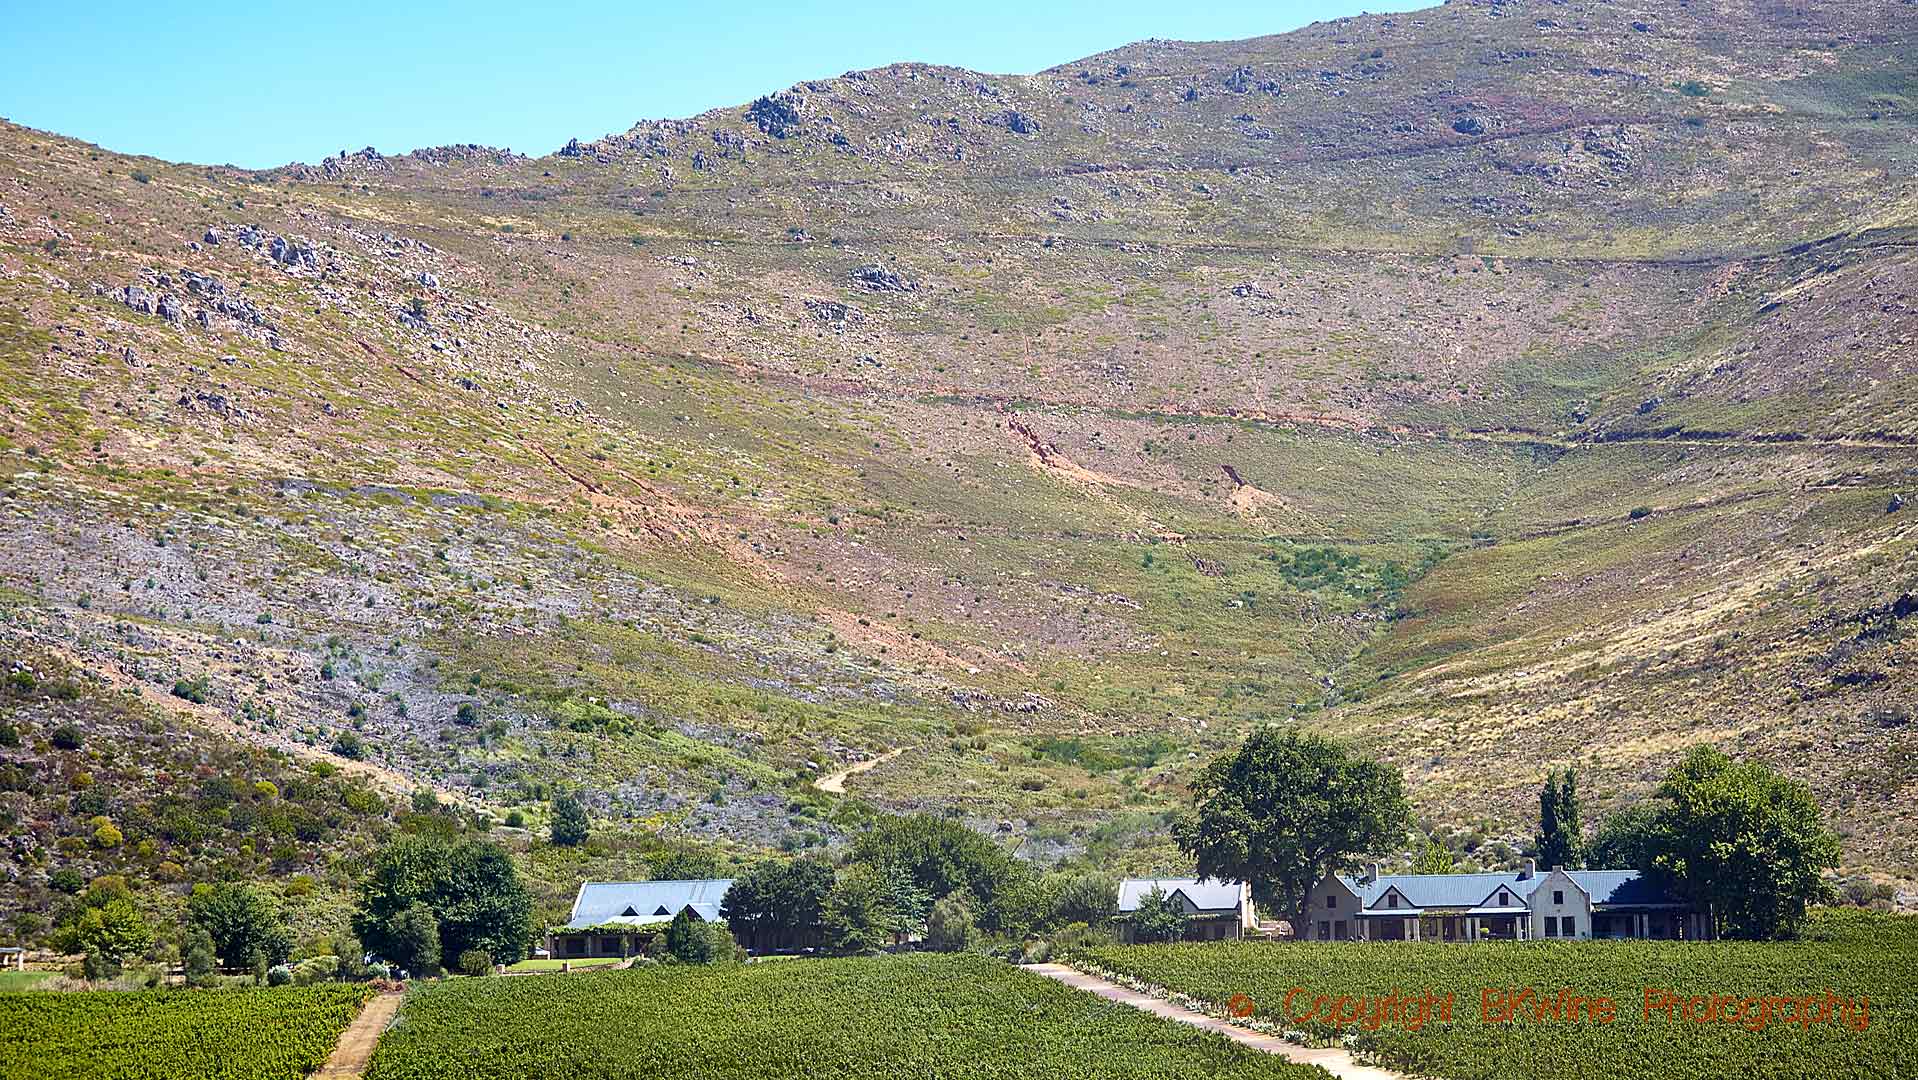 Vineyards and a winery at the foot of a mountain in Franschhoek, South Africa